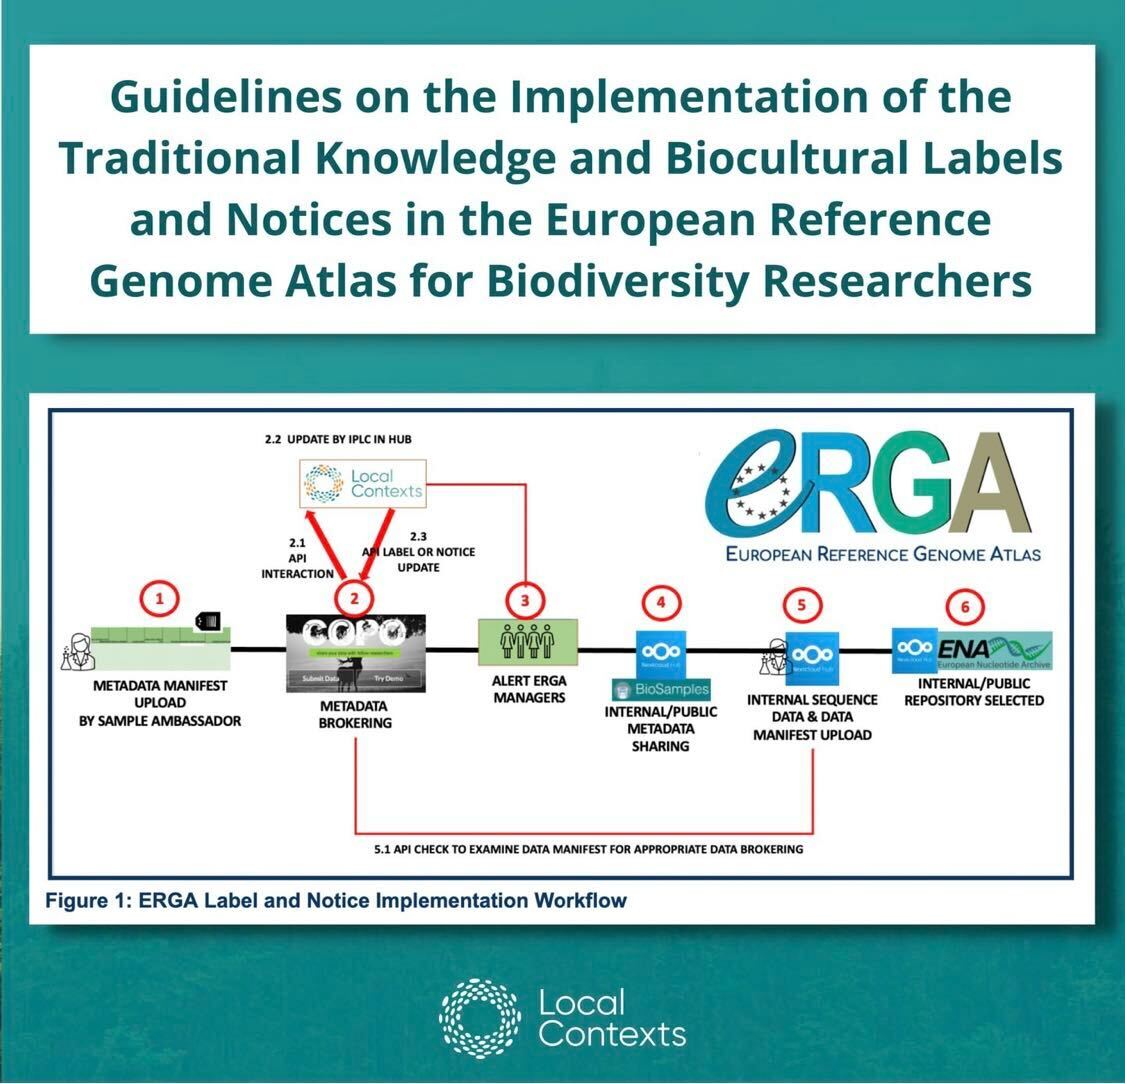 On a decorative blue background, title and diagram. Title: “Guidelines on the Implementation of the Traditional Knowledge and Biocultural Labels and Notices in the European Reference Genome Atlas for Biodiversity Researchers.” The diagram shows Figure 1, the ERGA Label and Notice Implementation Workflow, steps 1 to 6. Step 1, metadata manifest upload by sample ambassador. Step 2, metadata brokering. Step 3, alert ERGA managers. Step 4, internal/public metadata sharing. Step 5, internal sequence data and data manifest upload. Step 6, internal/public repository selected.